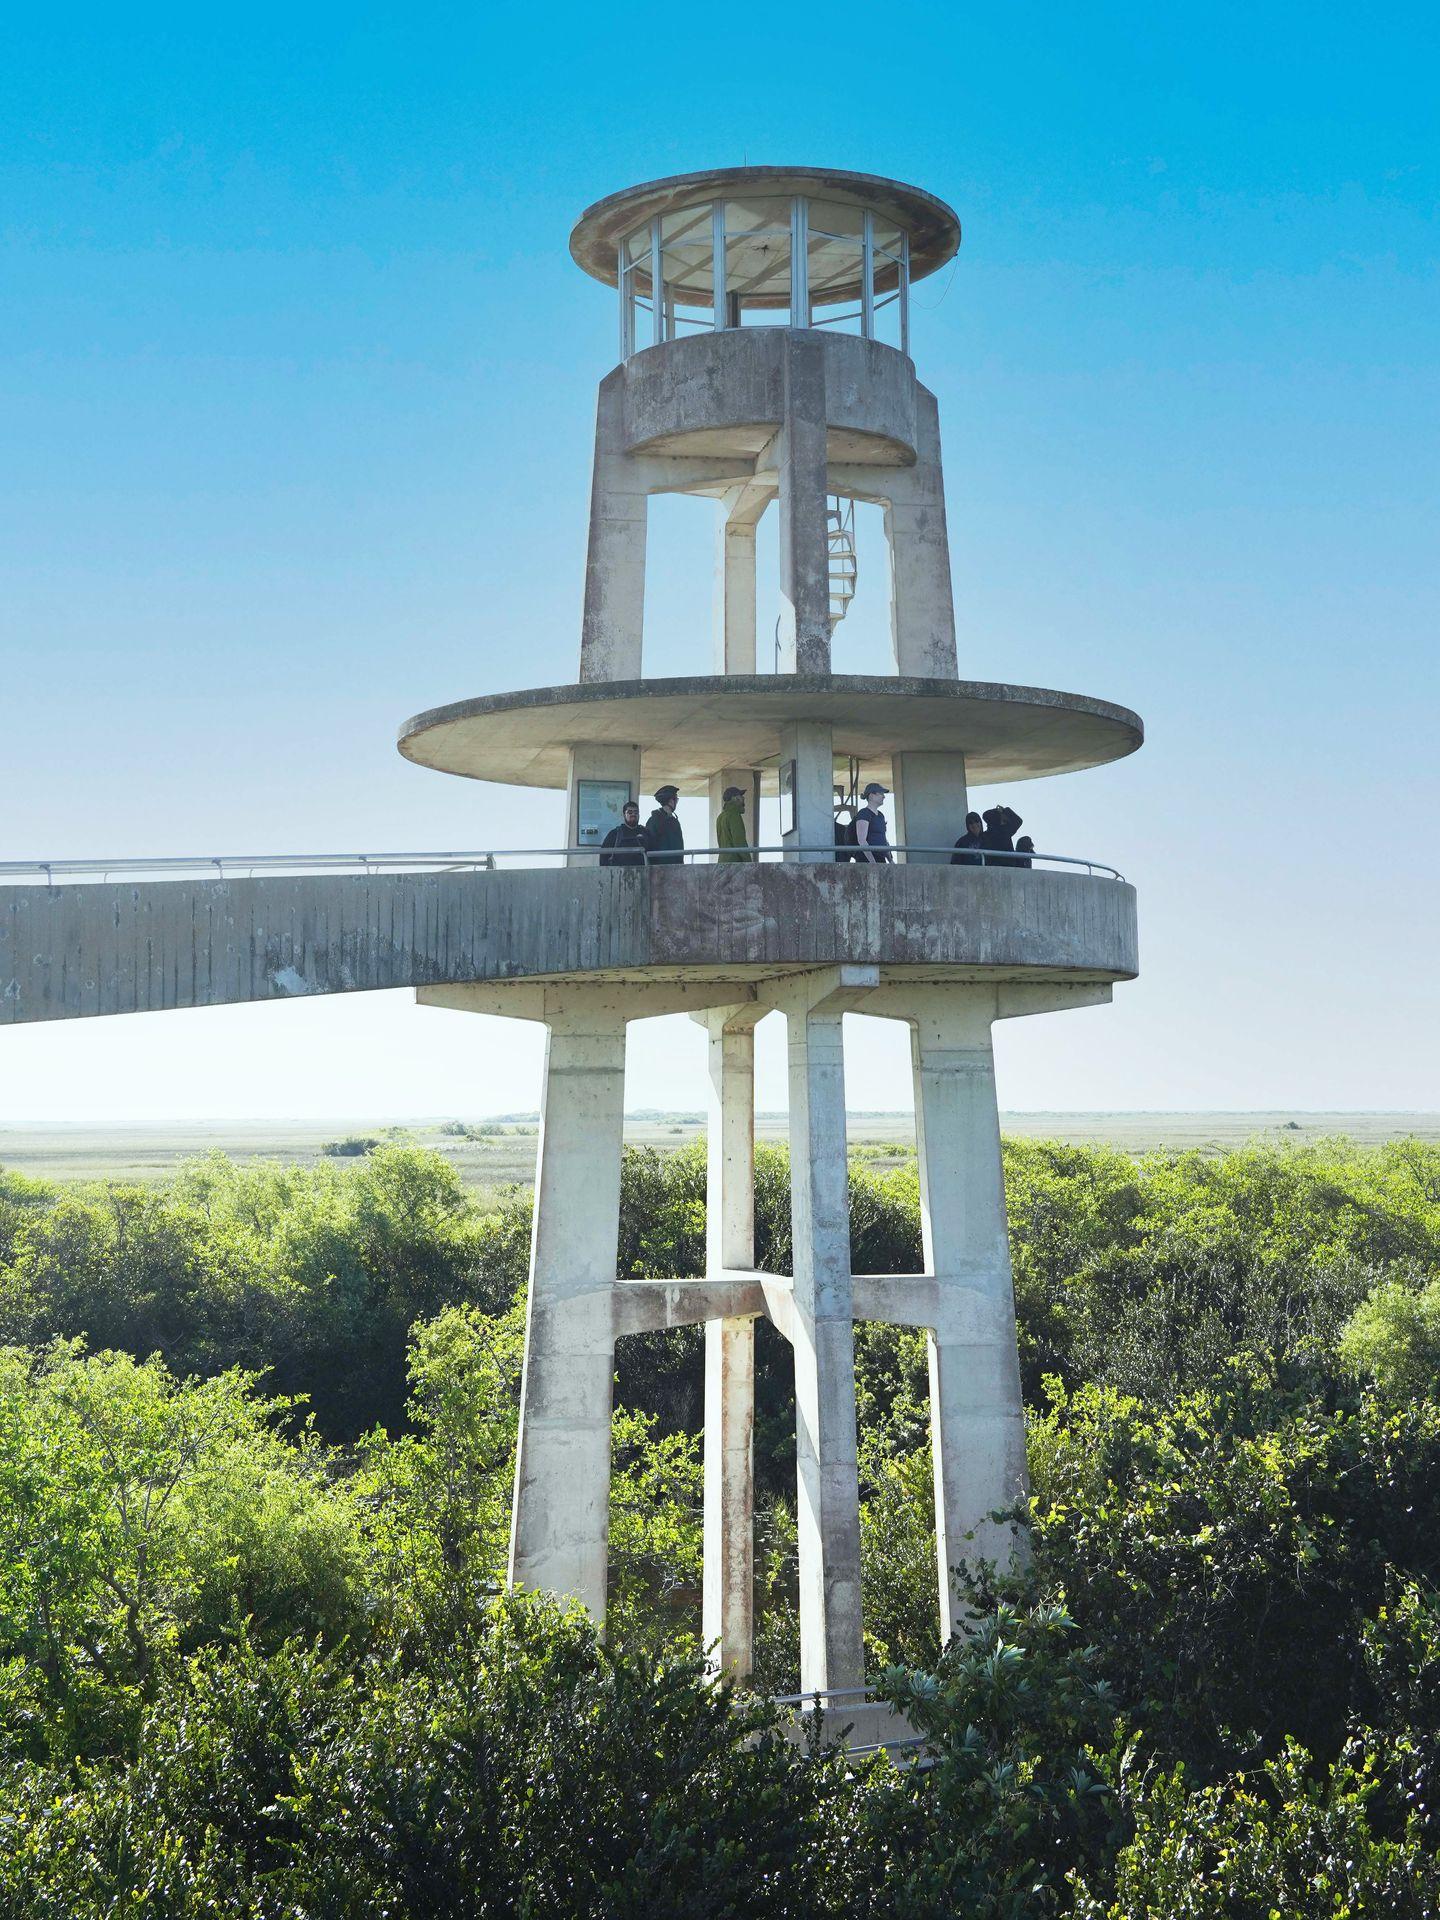 A path leading up to a gray observation tower with a spiral staircase in the center.